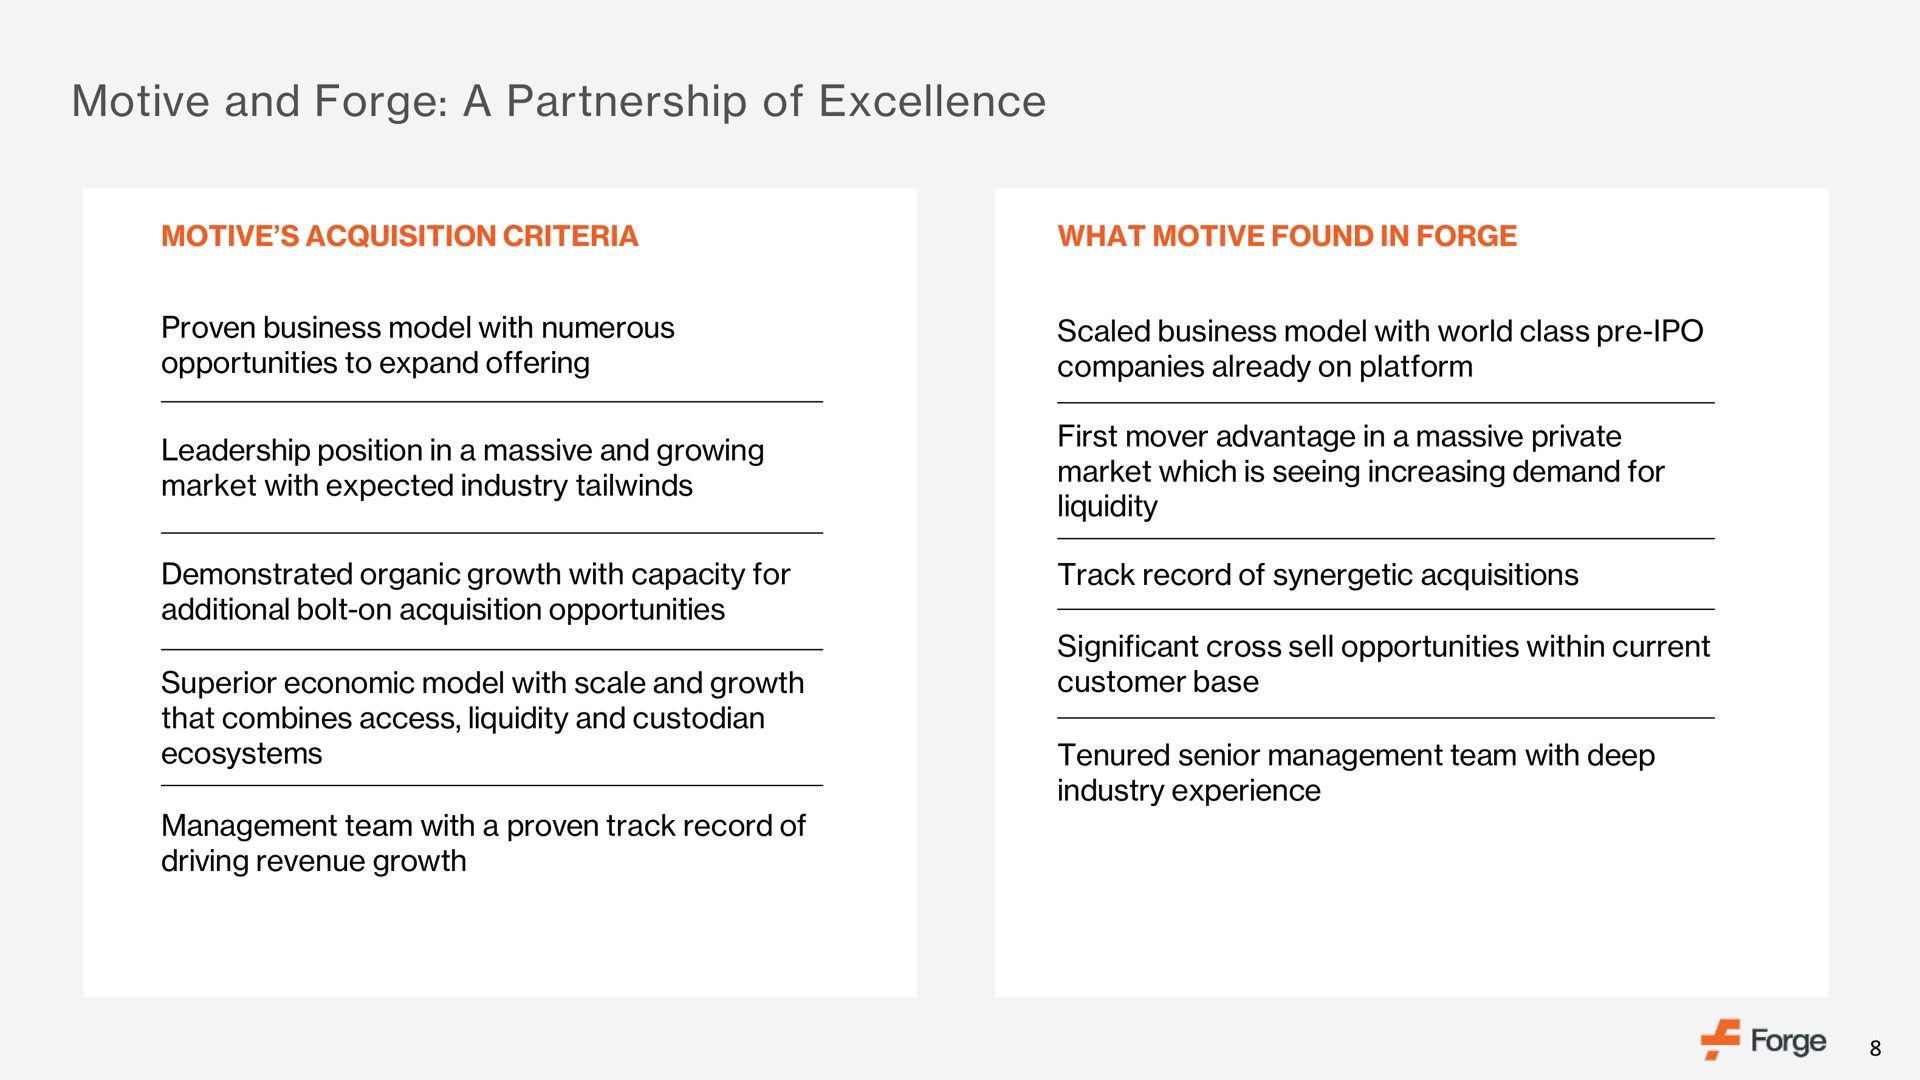 motive and forge a partnership of excellence | Forge